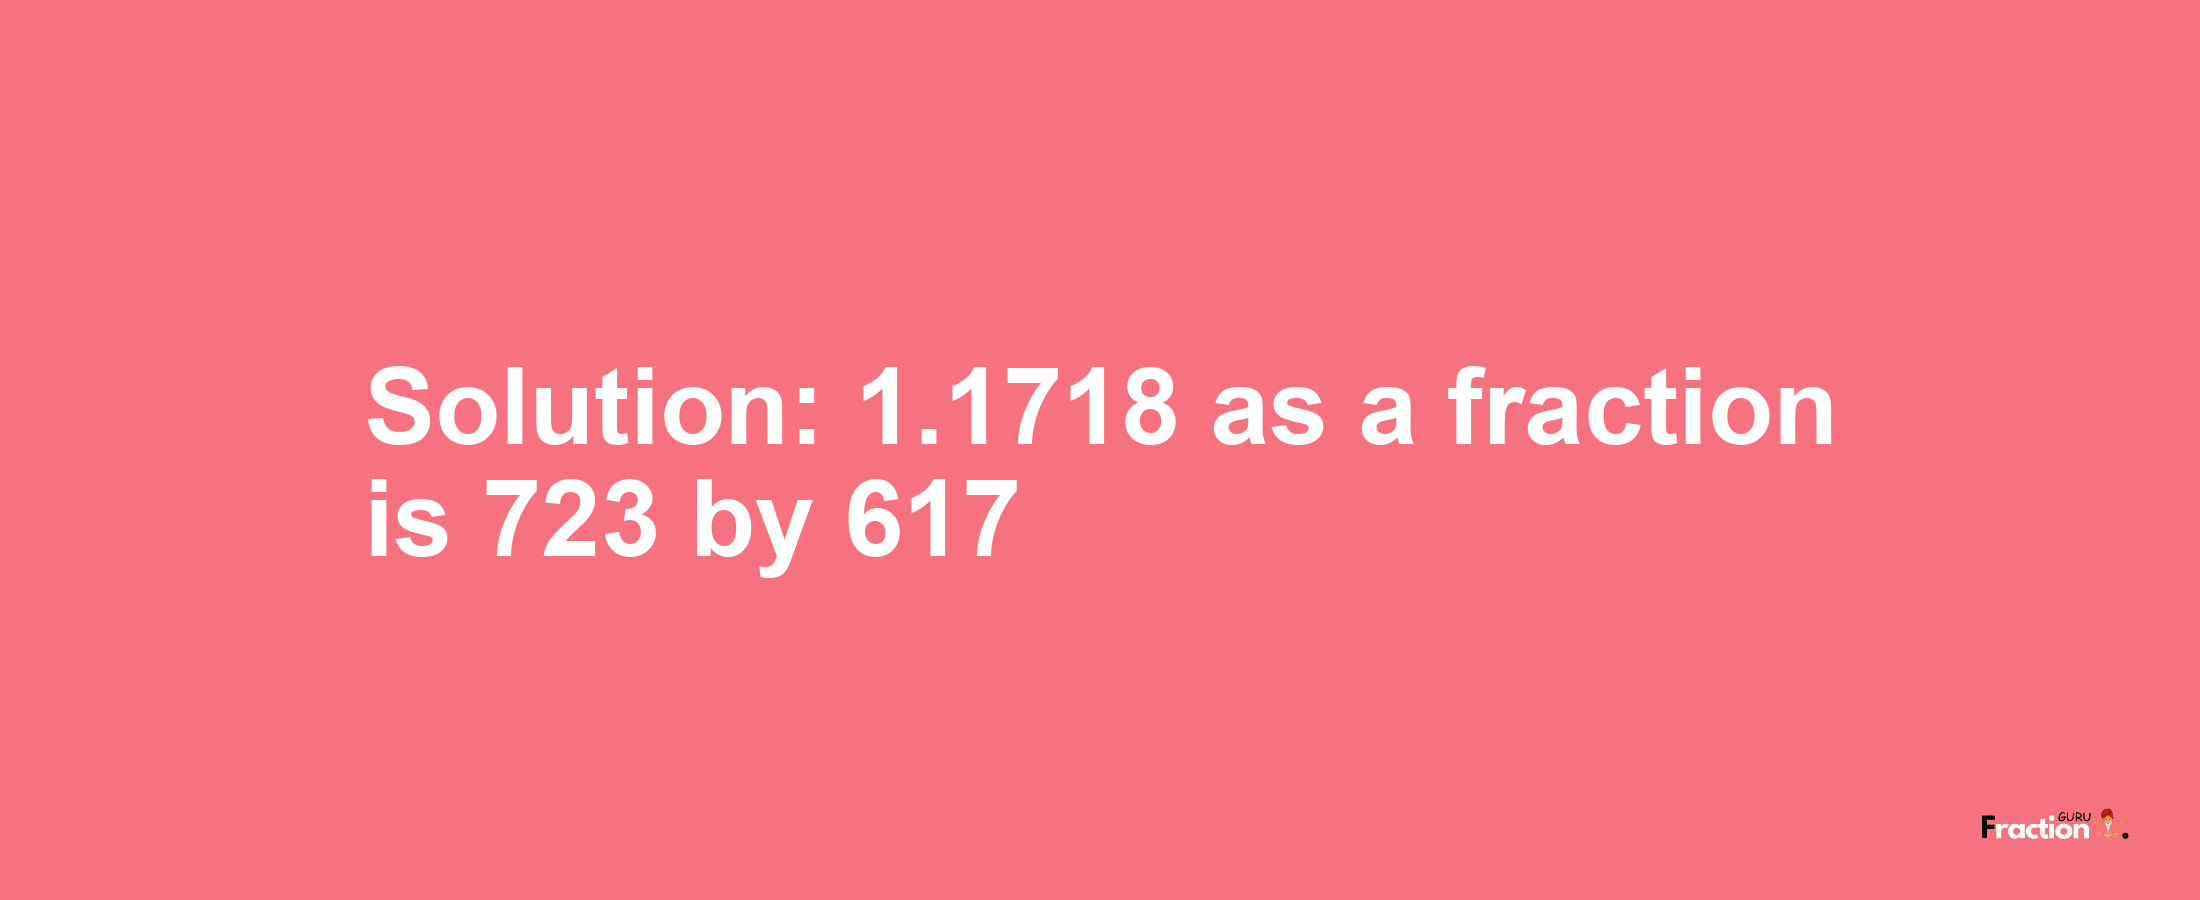 Solution:1.1718 as a fraction is 723/617